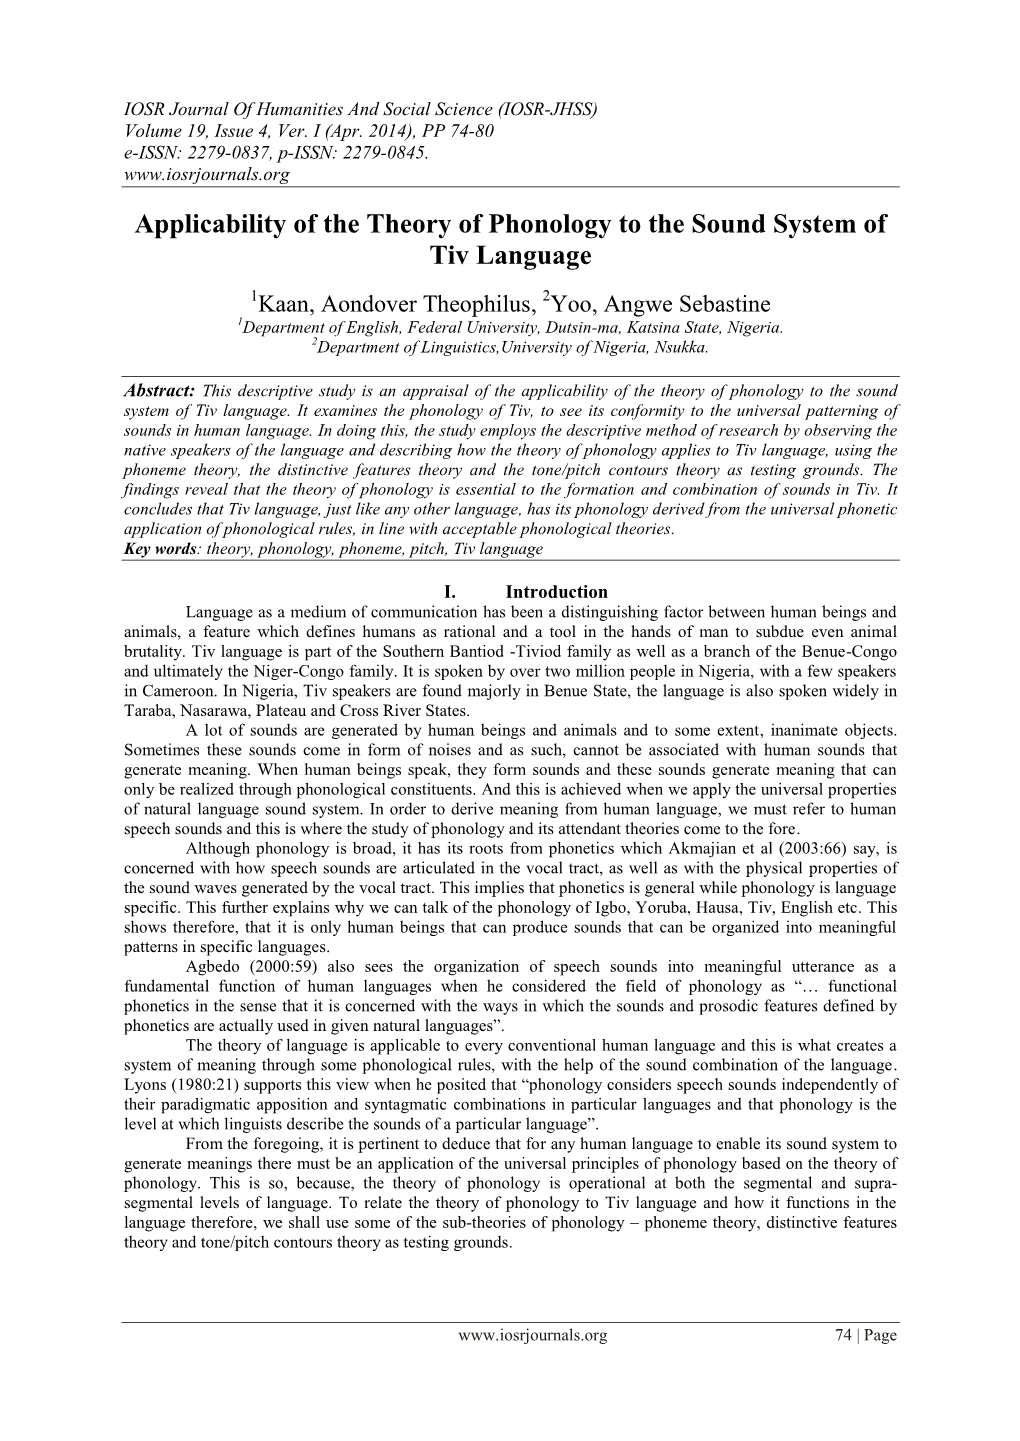 Applicability of the Theory of Phonology to the Sound System of Tiv Language